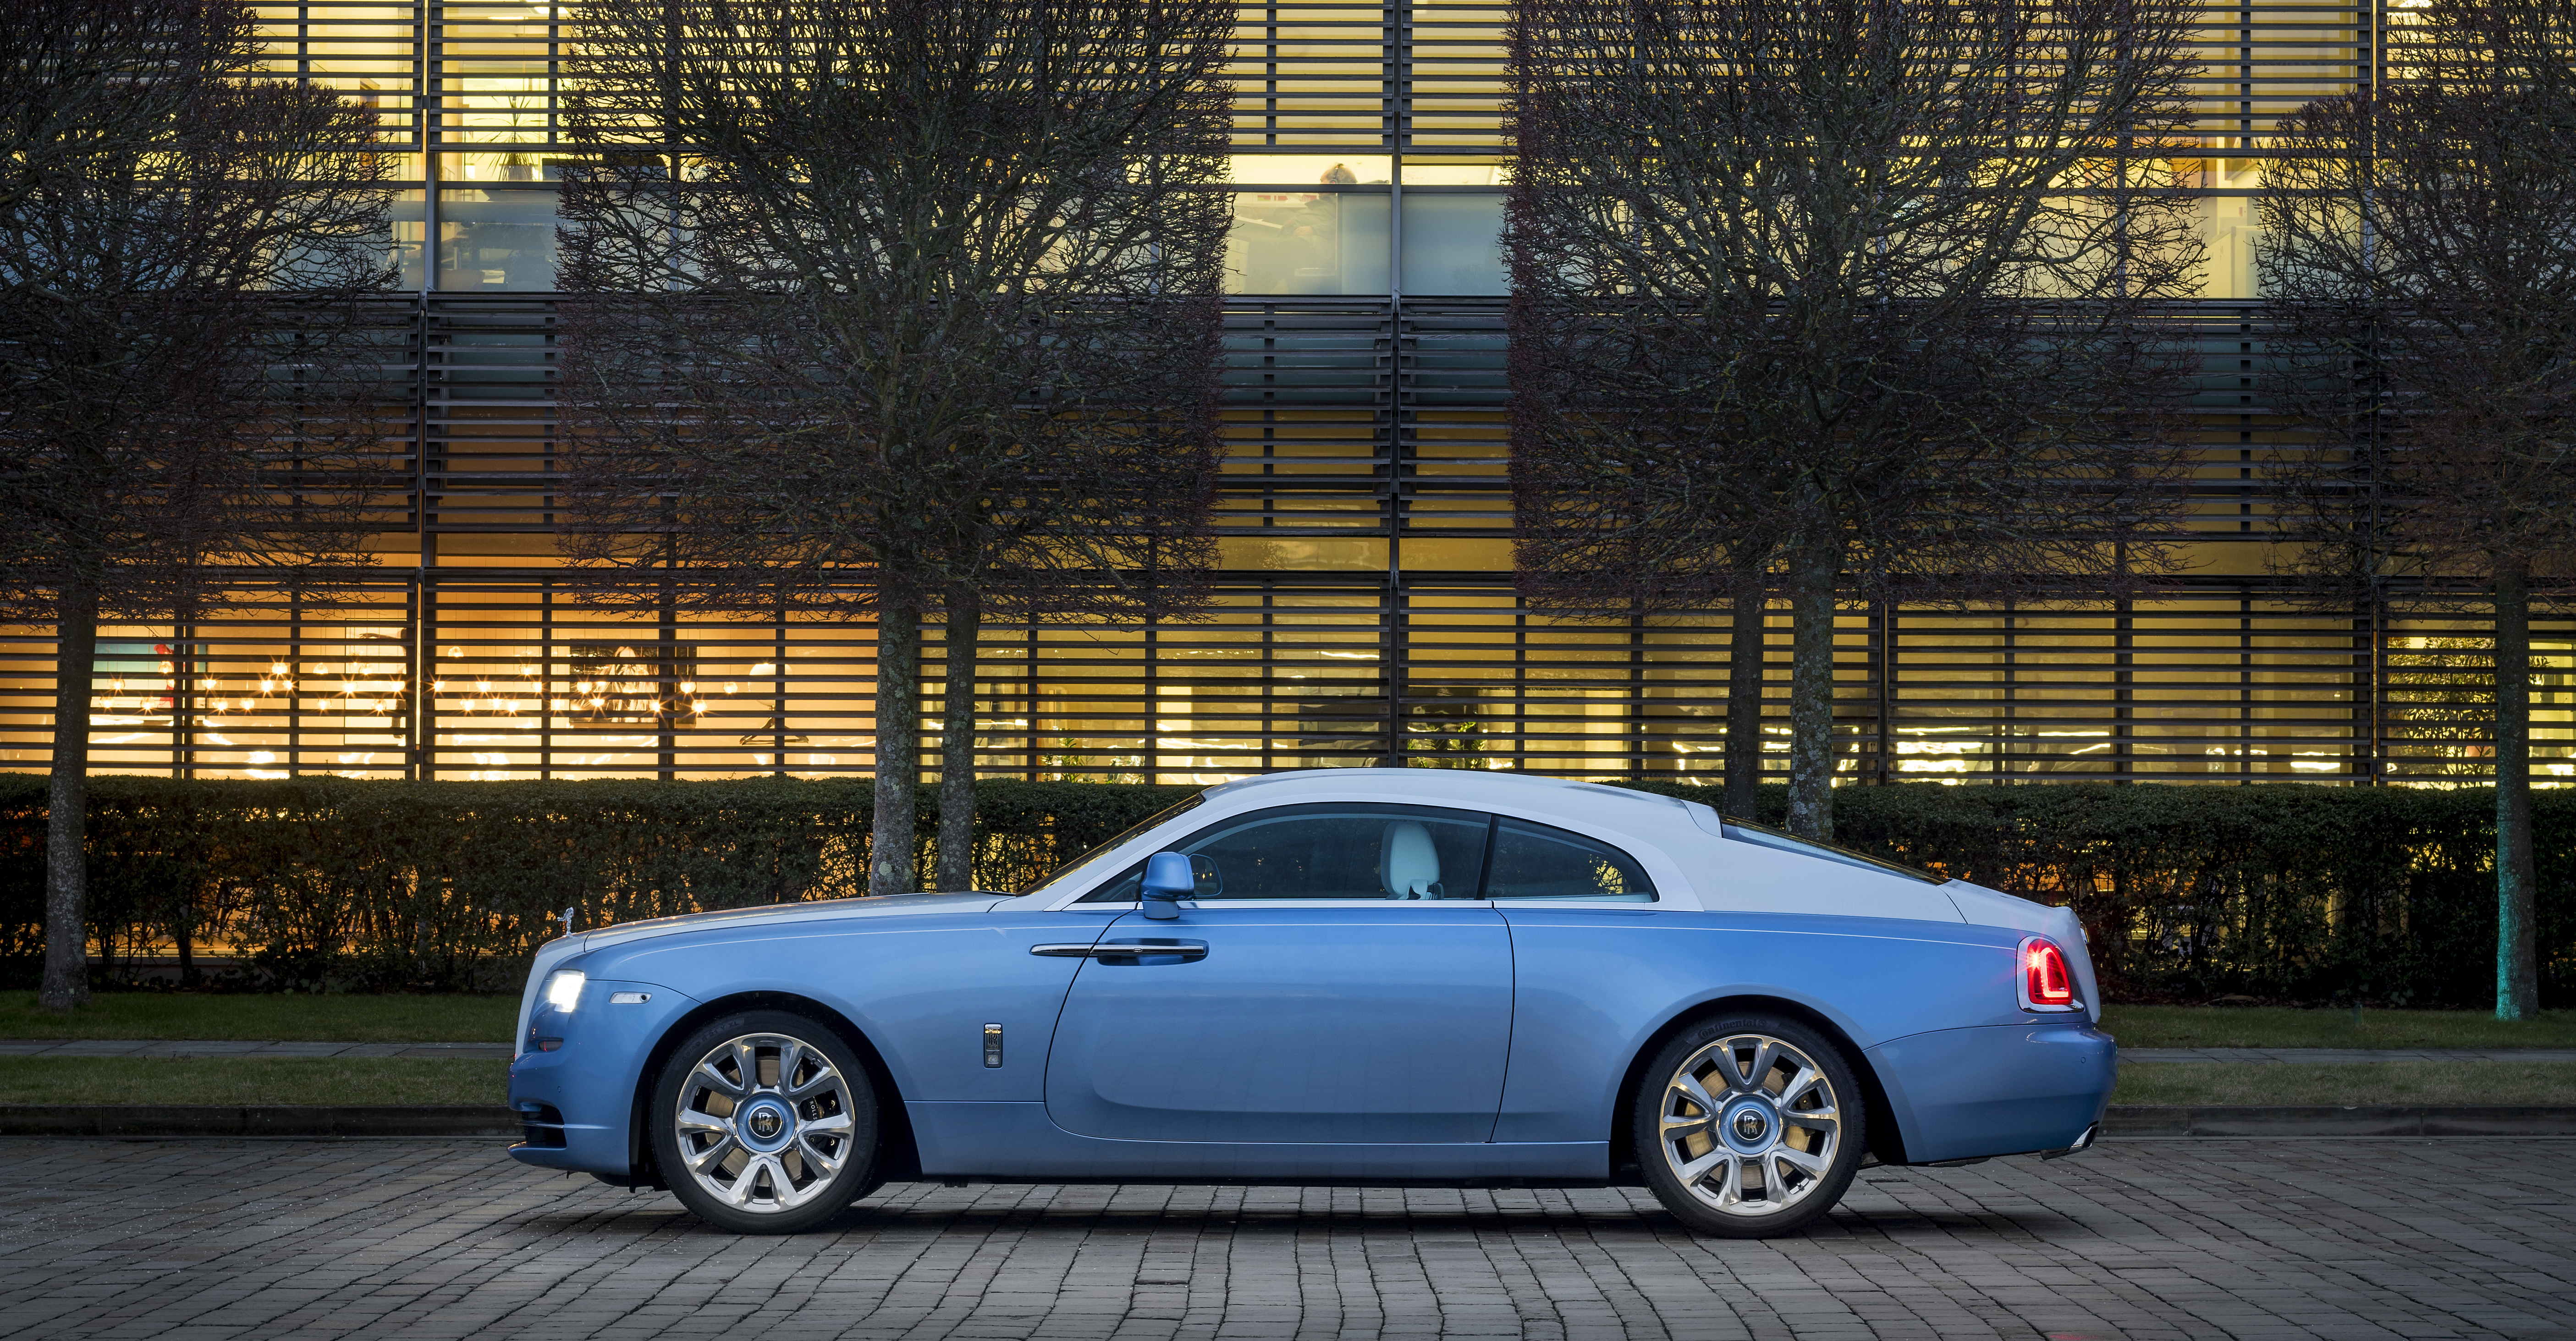 Falcon Wraith Features Most Detailed Rolls-Royce Embroidery Ever